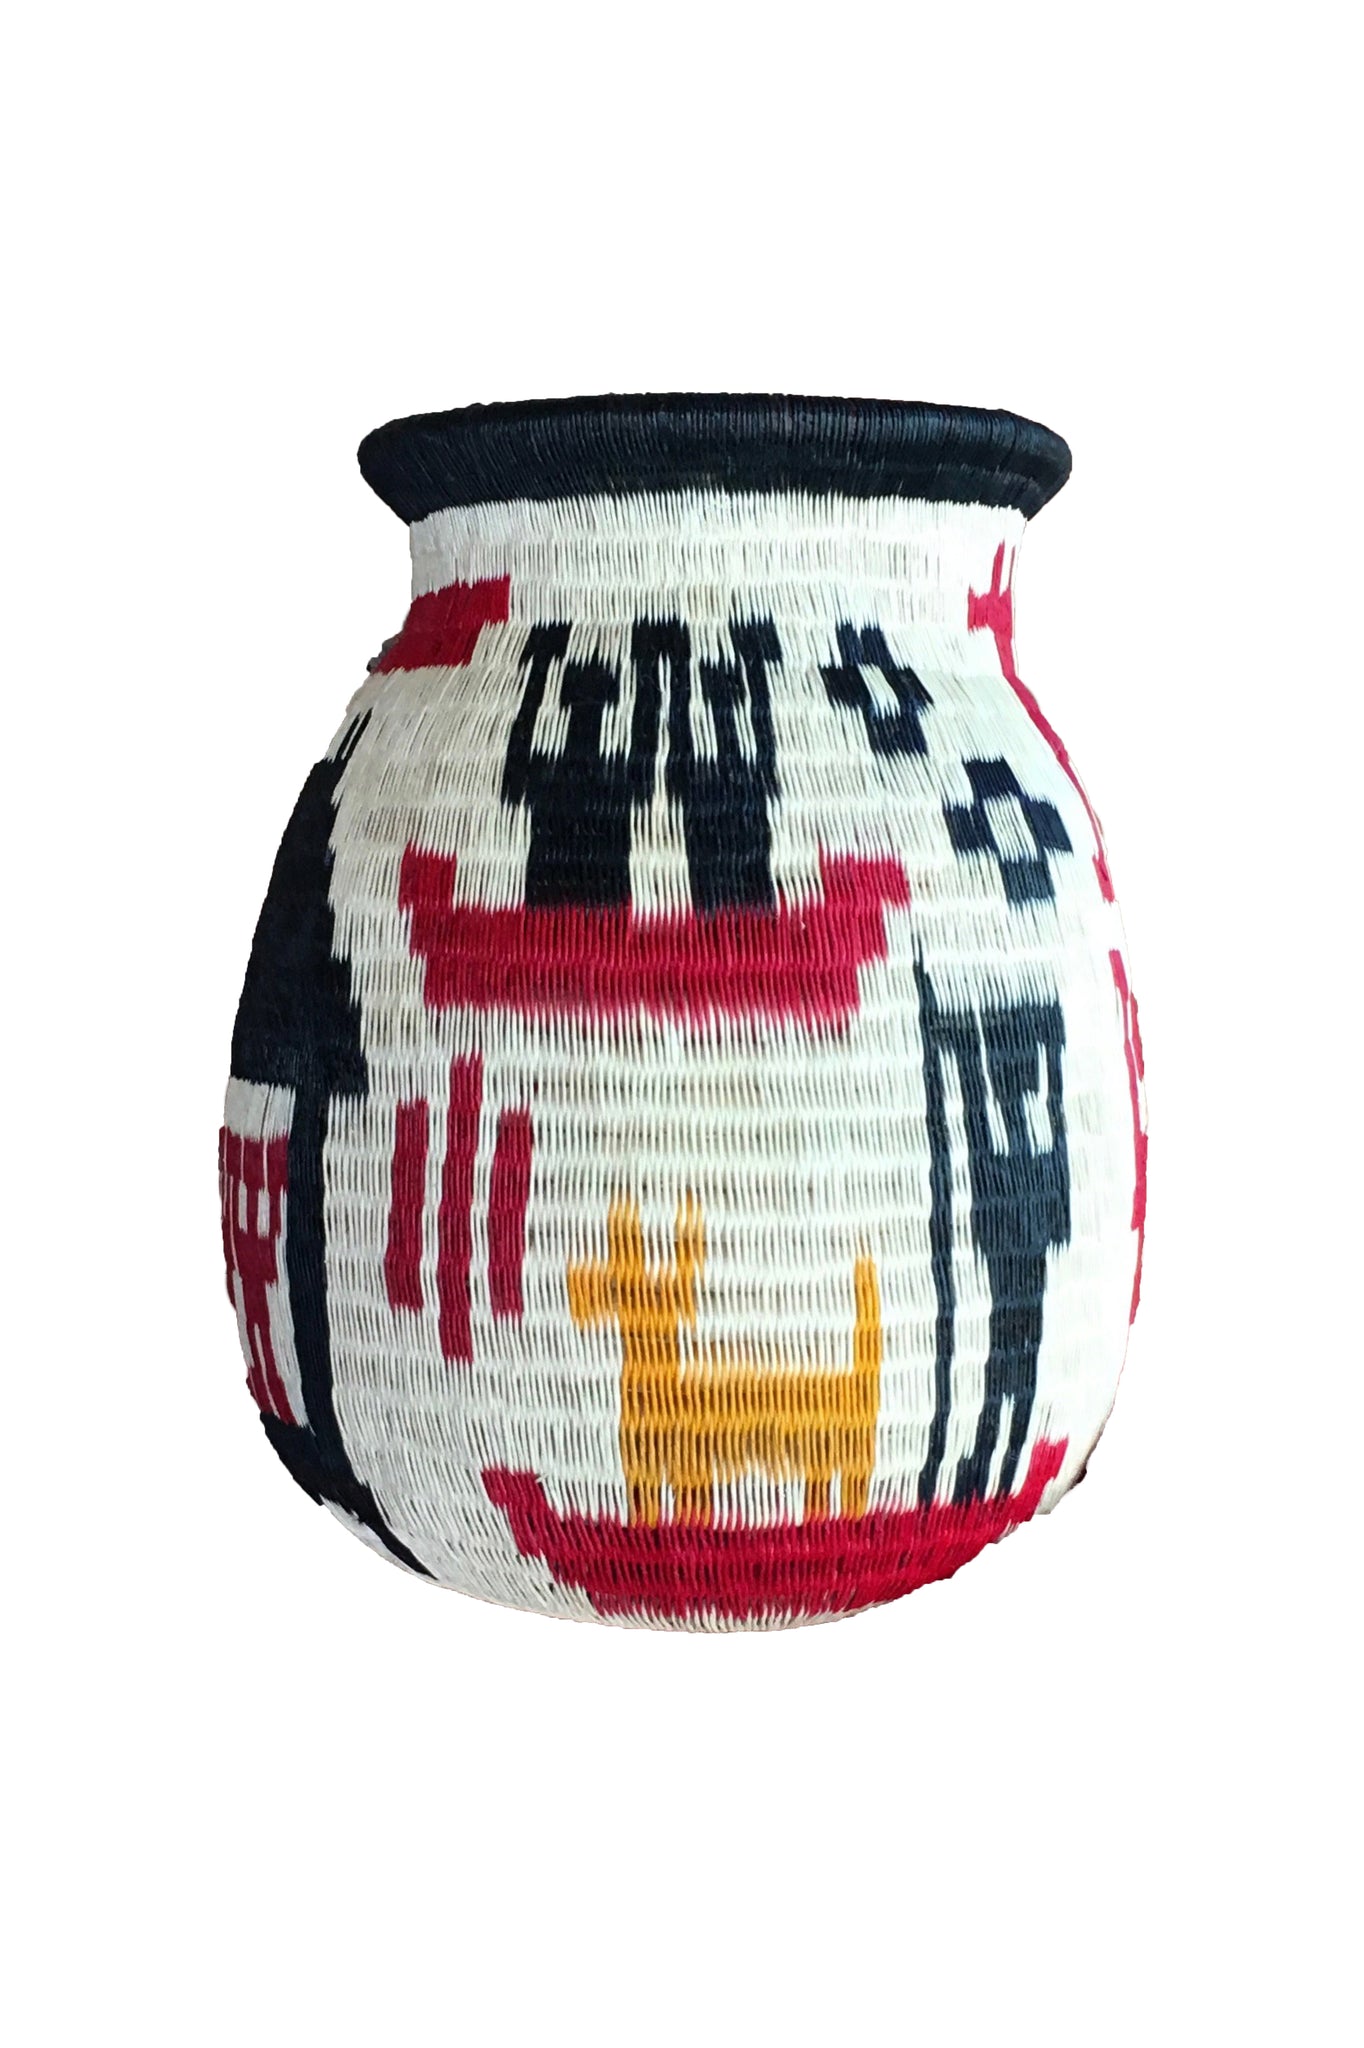 Wounaan Art Vase by Tulia's Artisan Gallery. Handcrafted in Colombia. One of a kind statement home decor vase with an ethnographic design. All handcrafted by award-winning indigenous Wounaan artisans of Colombia. Color multi. 100% palm leaf.